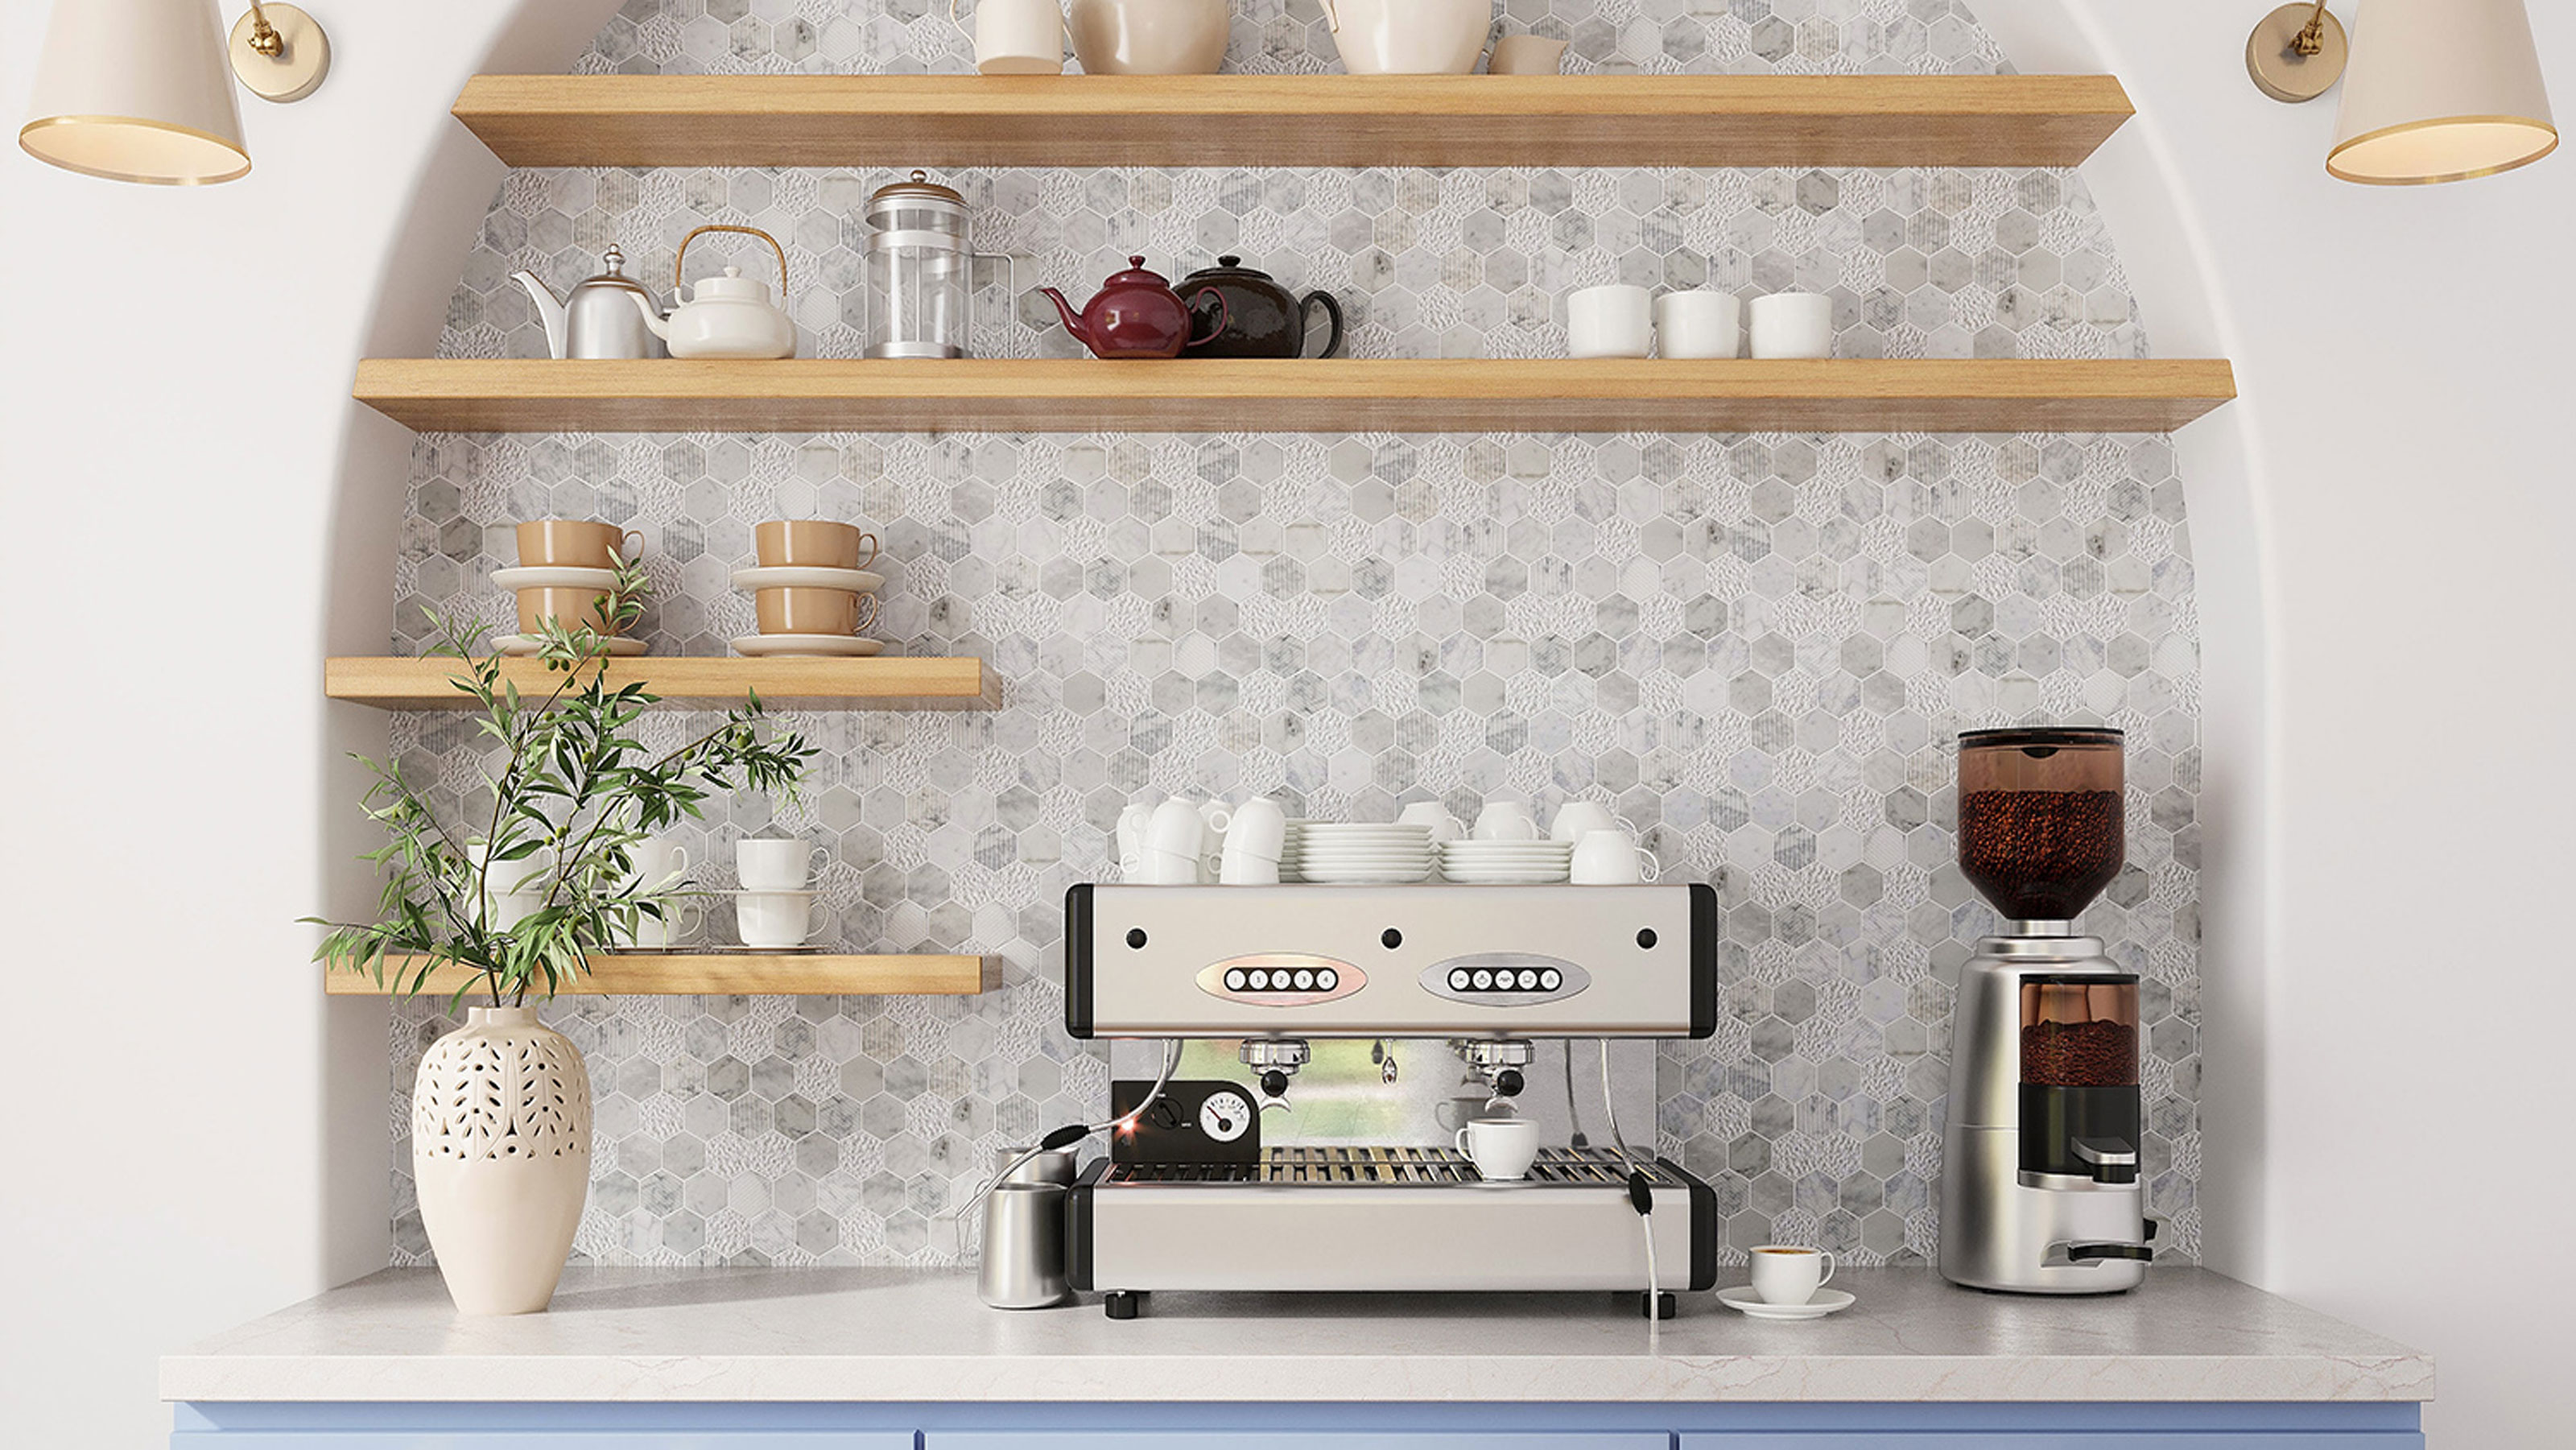 12 coffee bar ideas to create a buzzing cafe culture at home